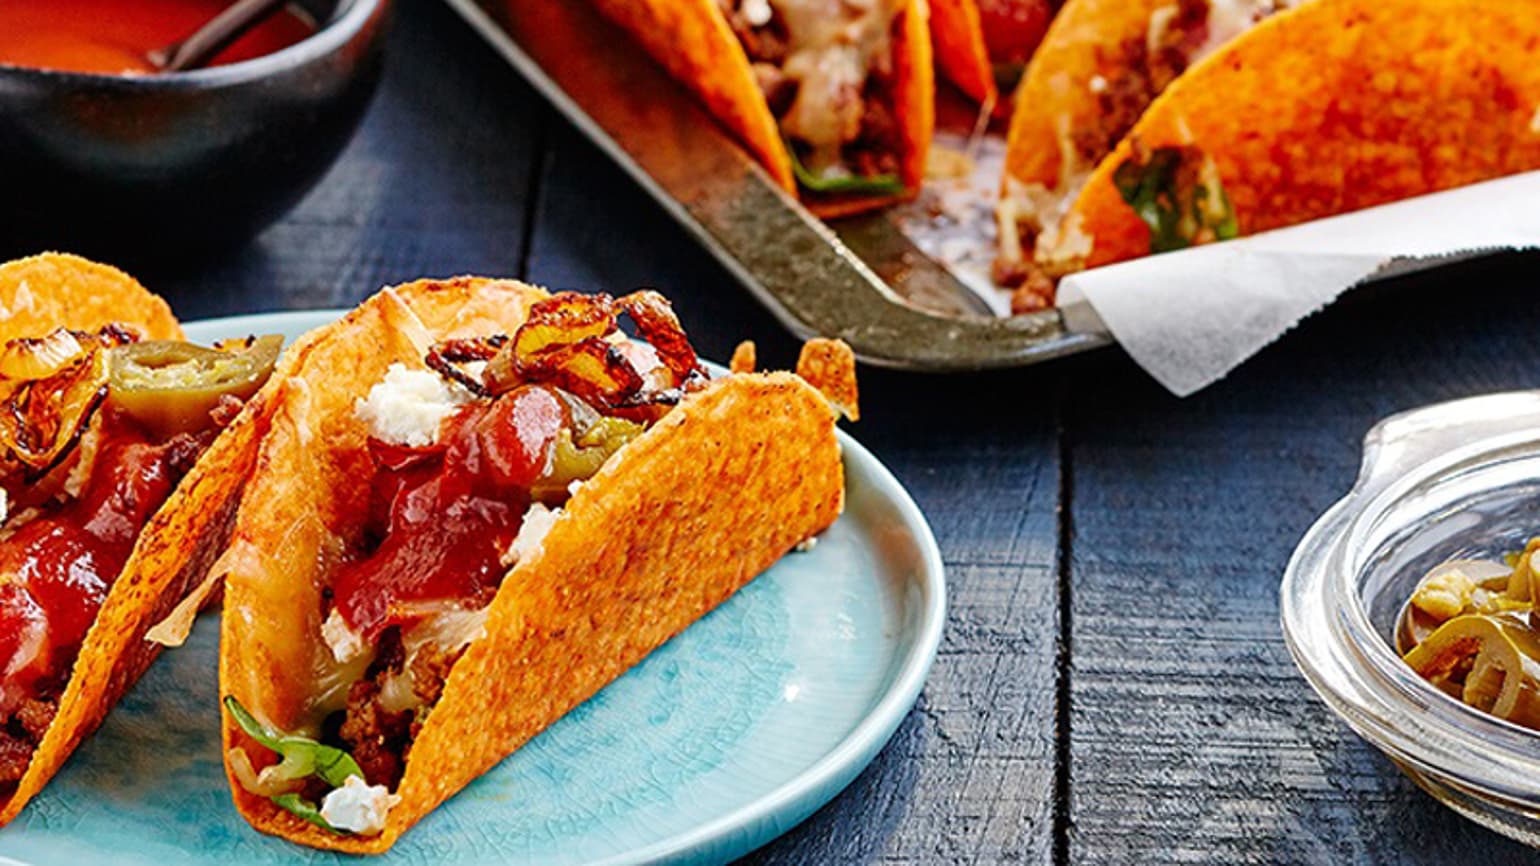 Baked BOLD Tacos with Pork and Beef Mince